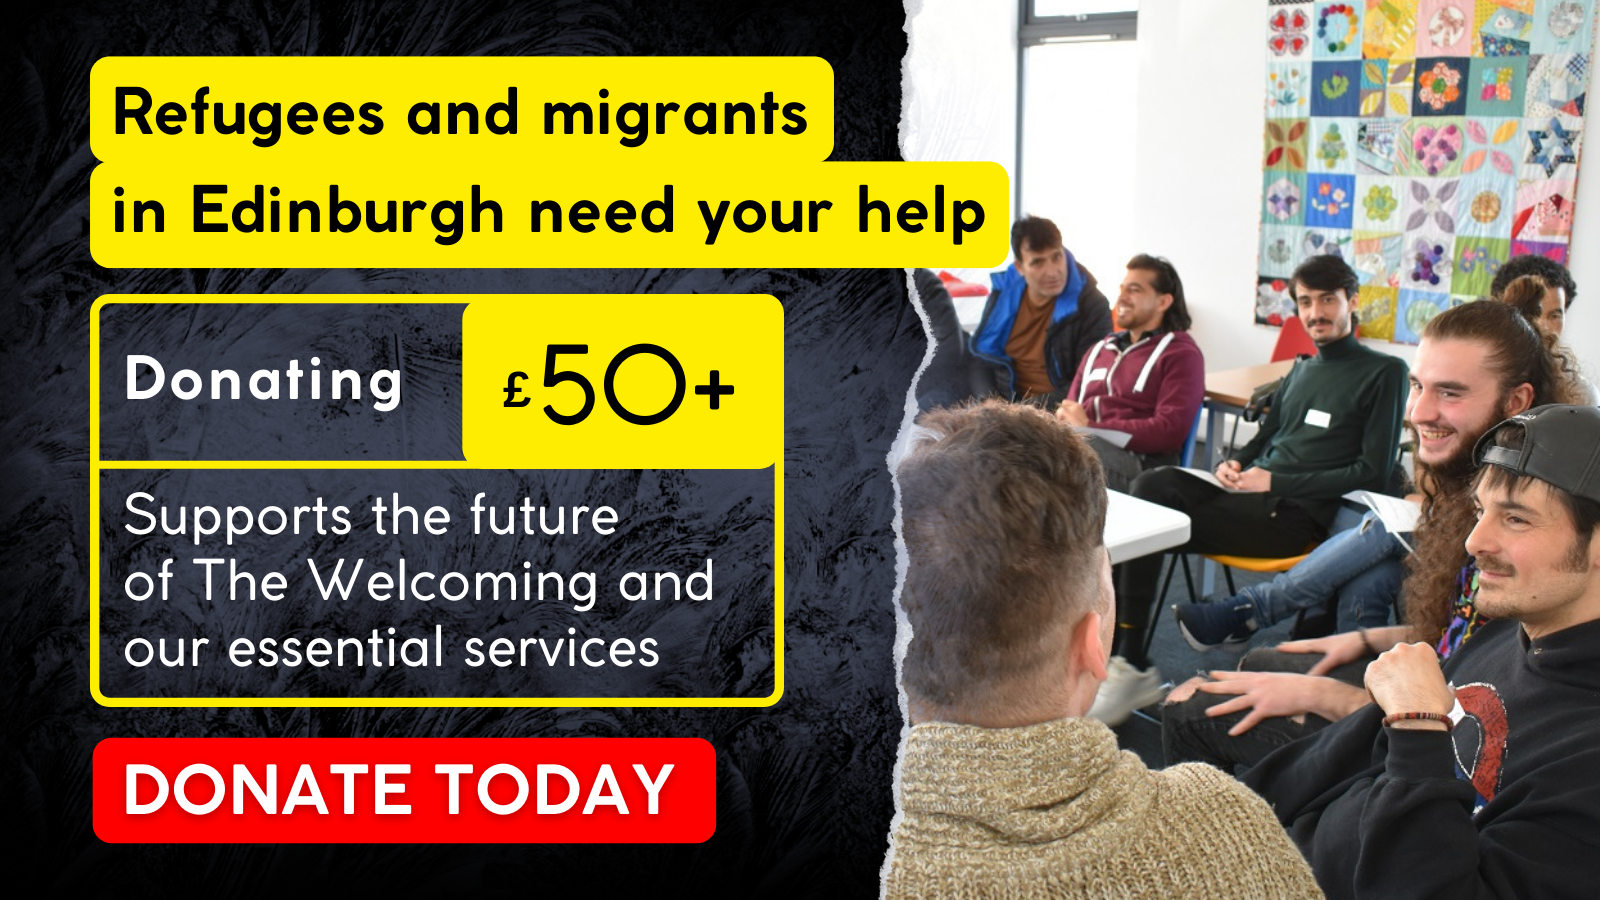 Donating £50 or more will support the future of The Welcoming and our essential services